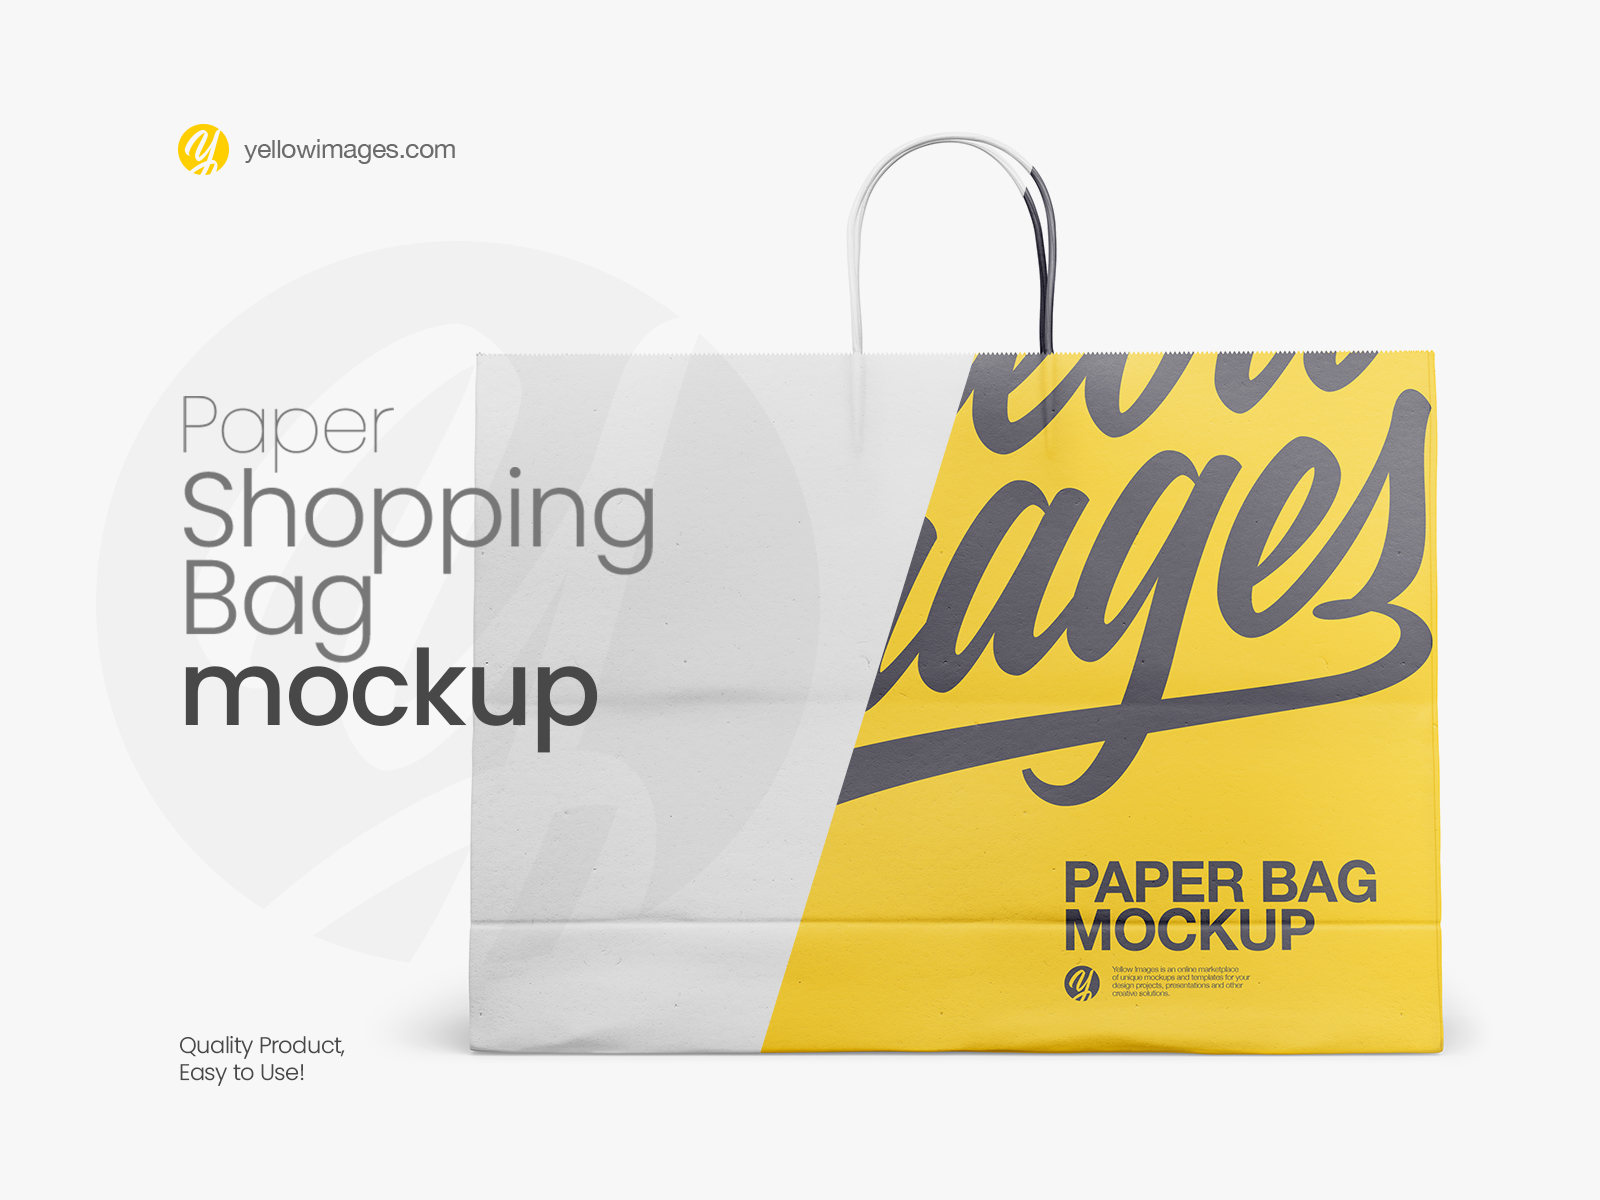 Download Paper Logo Mockup Template Download Free And Premium Psd Mockup Templates And Design Assets Yellowimages Mockups